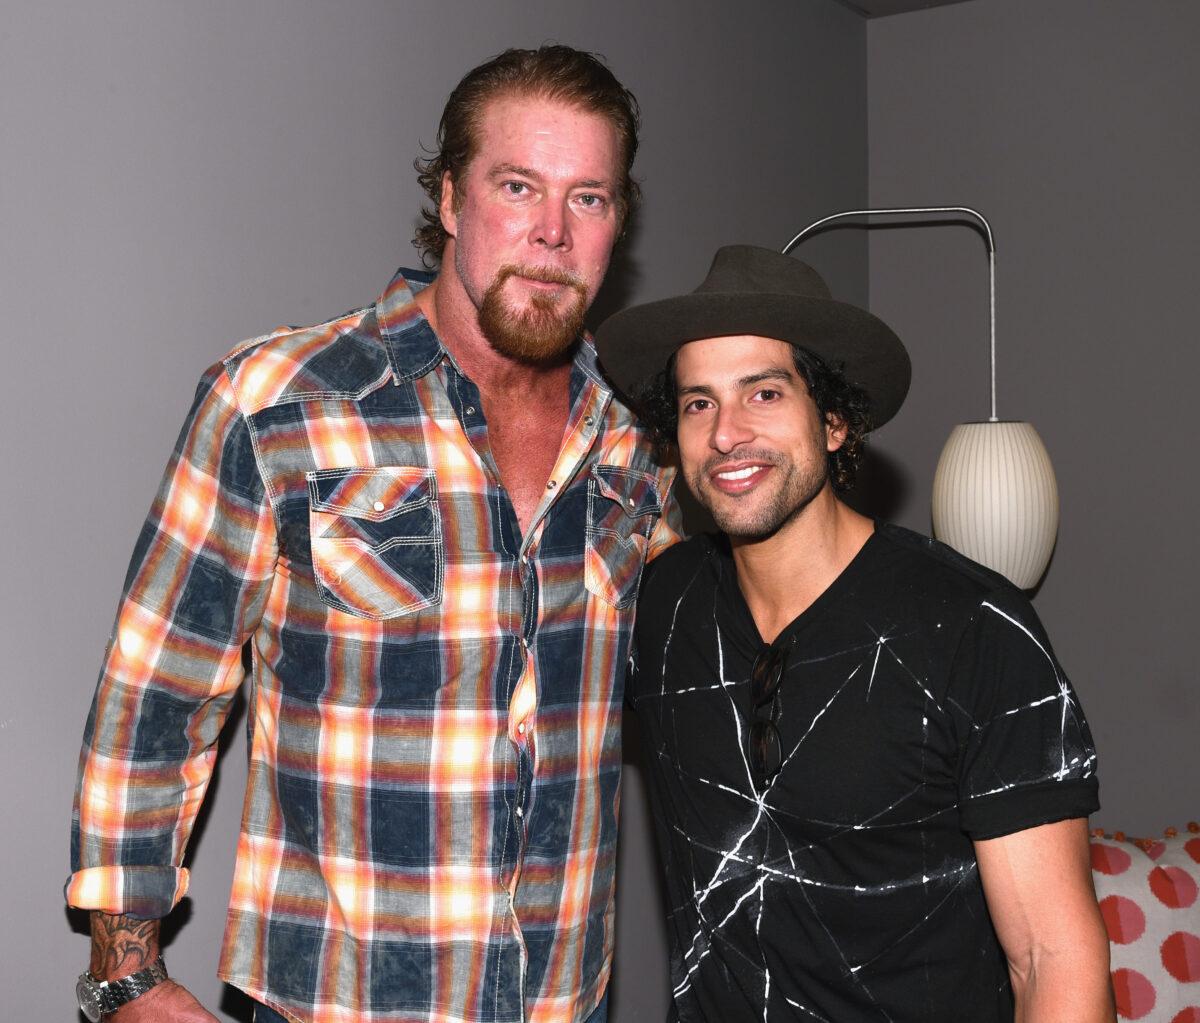 Wrestler Kevin Nash (L) and actor Adam Rodriguez pose for a photo during the Matt Bomer Spotlight Award Tribute at Trustees Theater on Day Two of the 17th Annual Savannah Film Festival presented by SCAD in Savannah, Georgia, on Oct. 26, 2014. (Andrew H. Walker/Getty Images for SCAD)